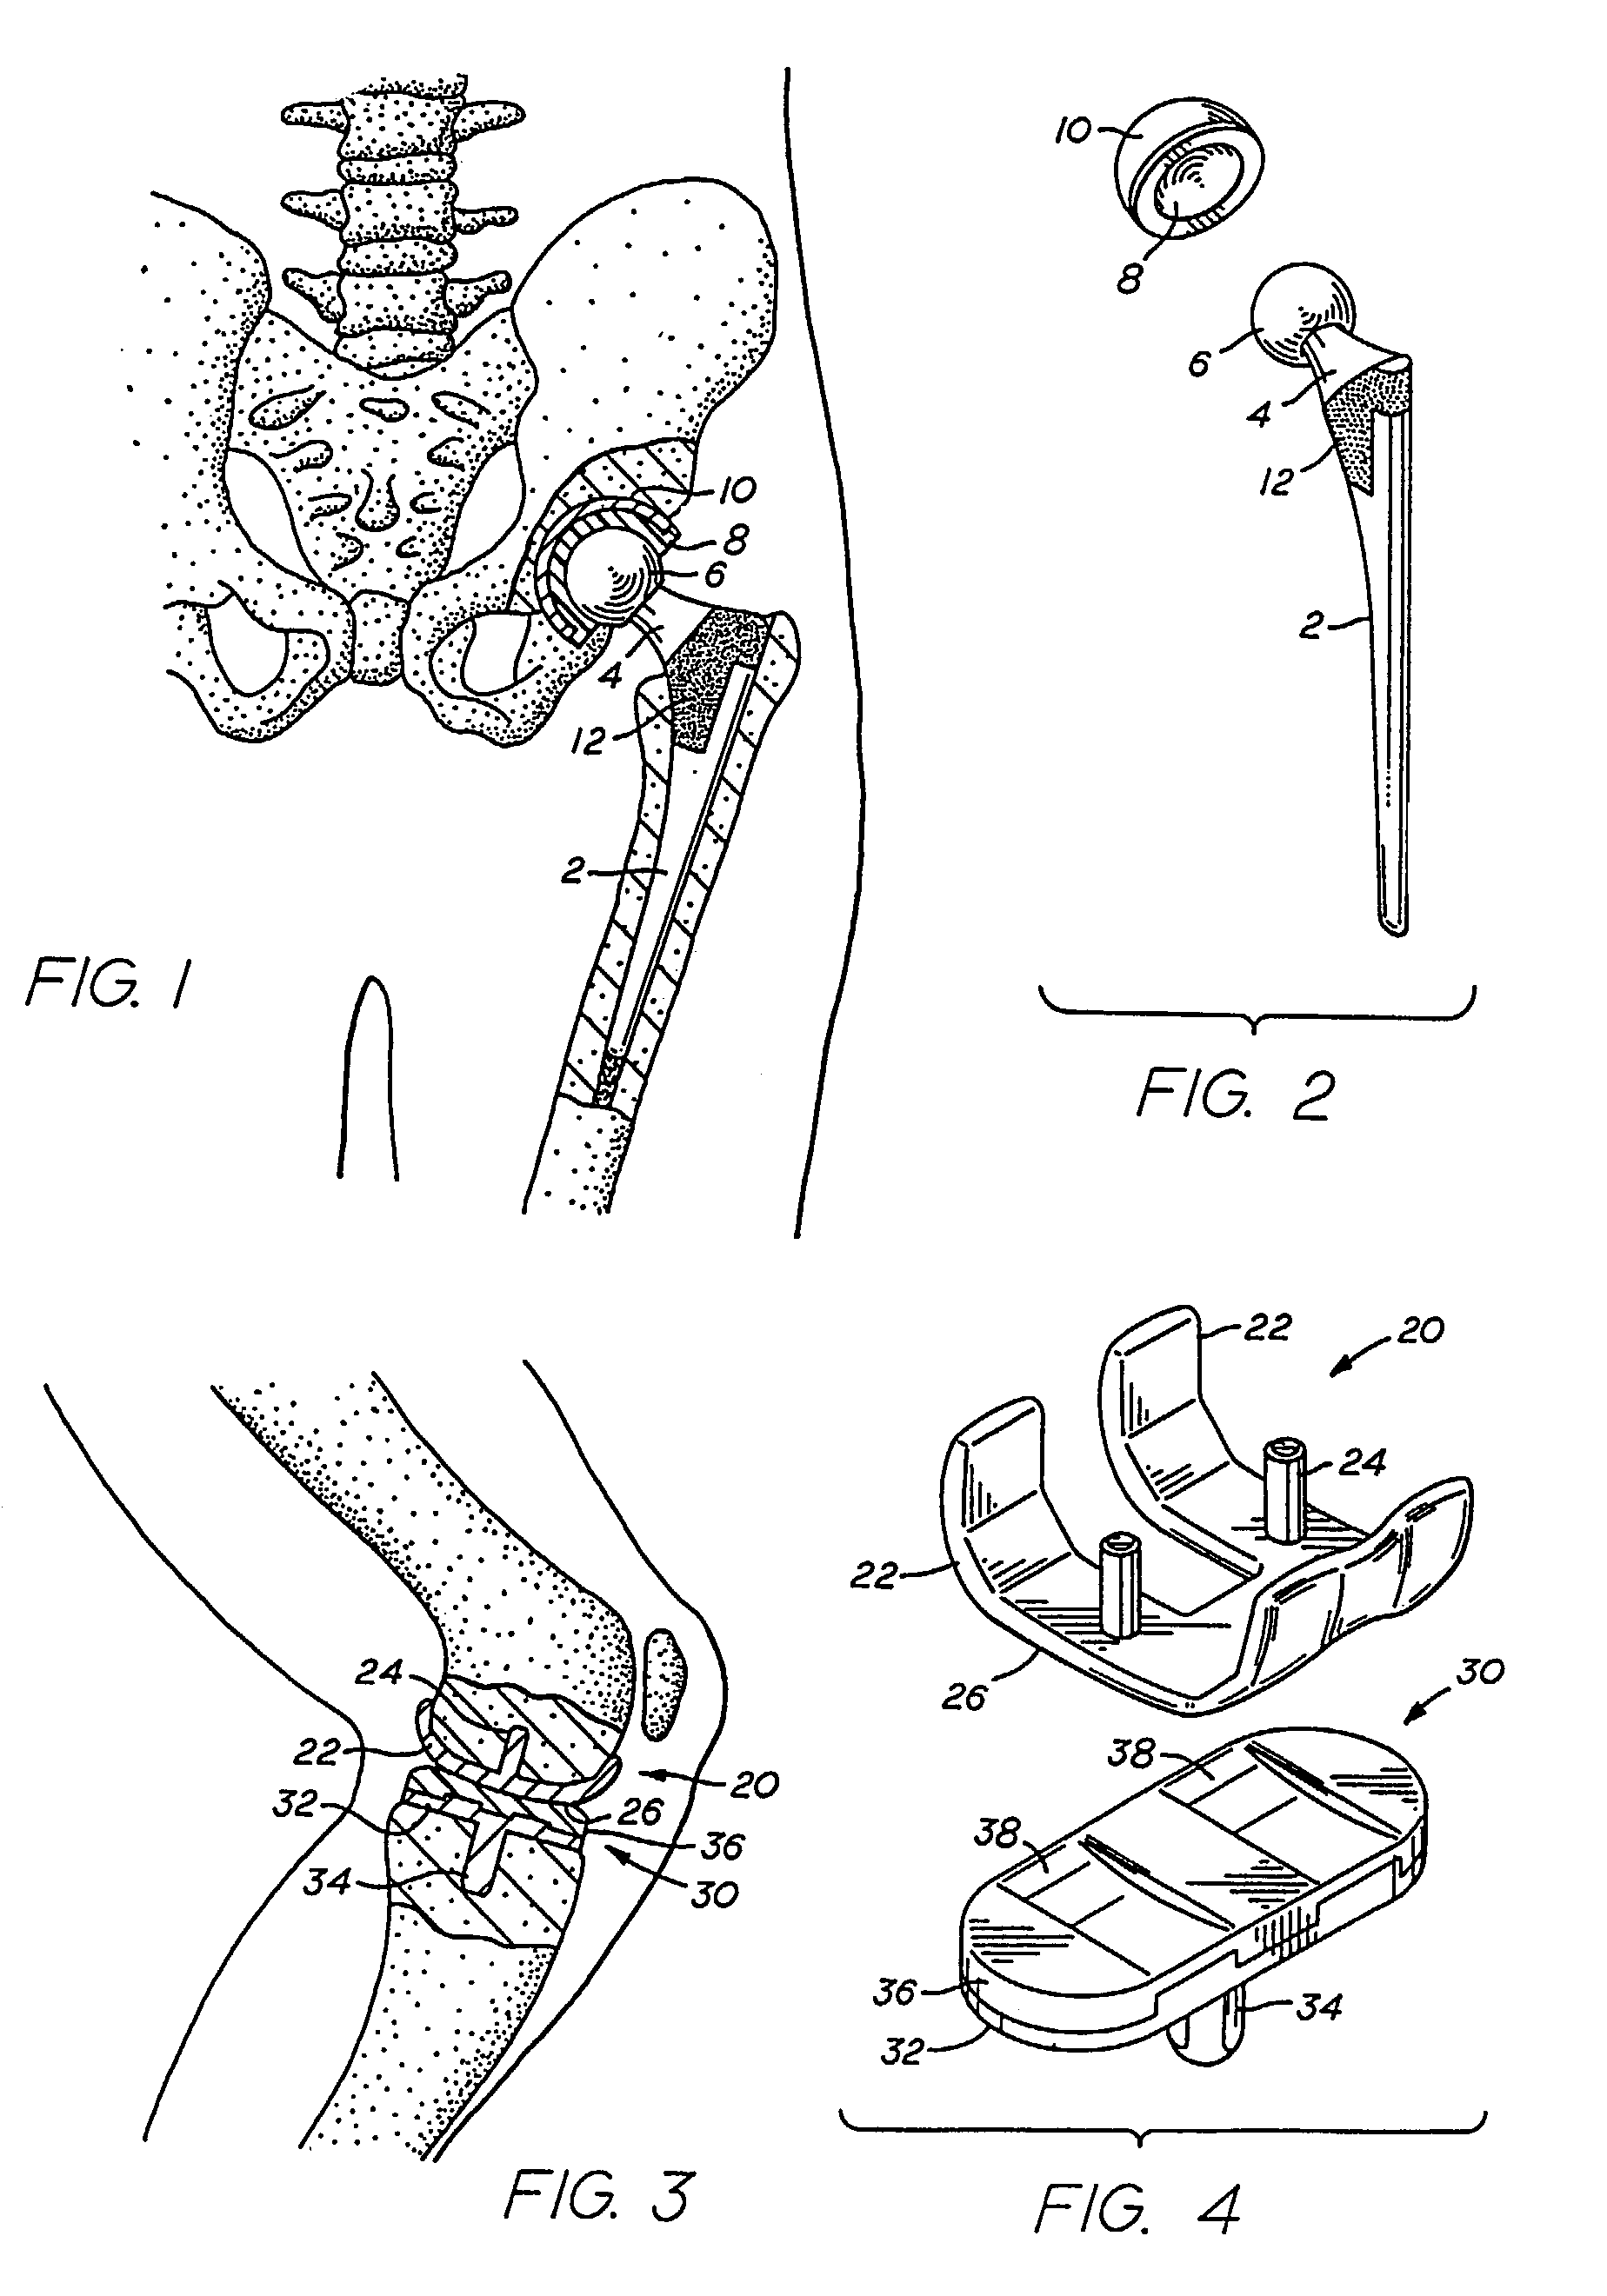 In-situ oxidized textured surfaces for prosthetic devices and method of making same